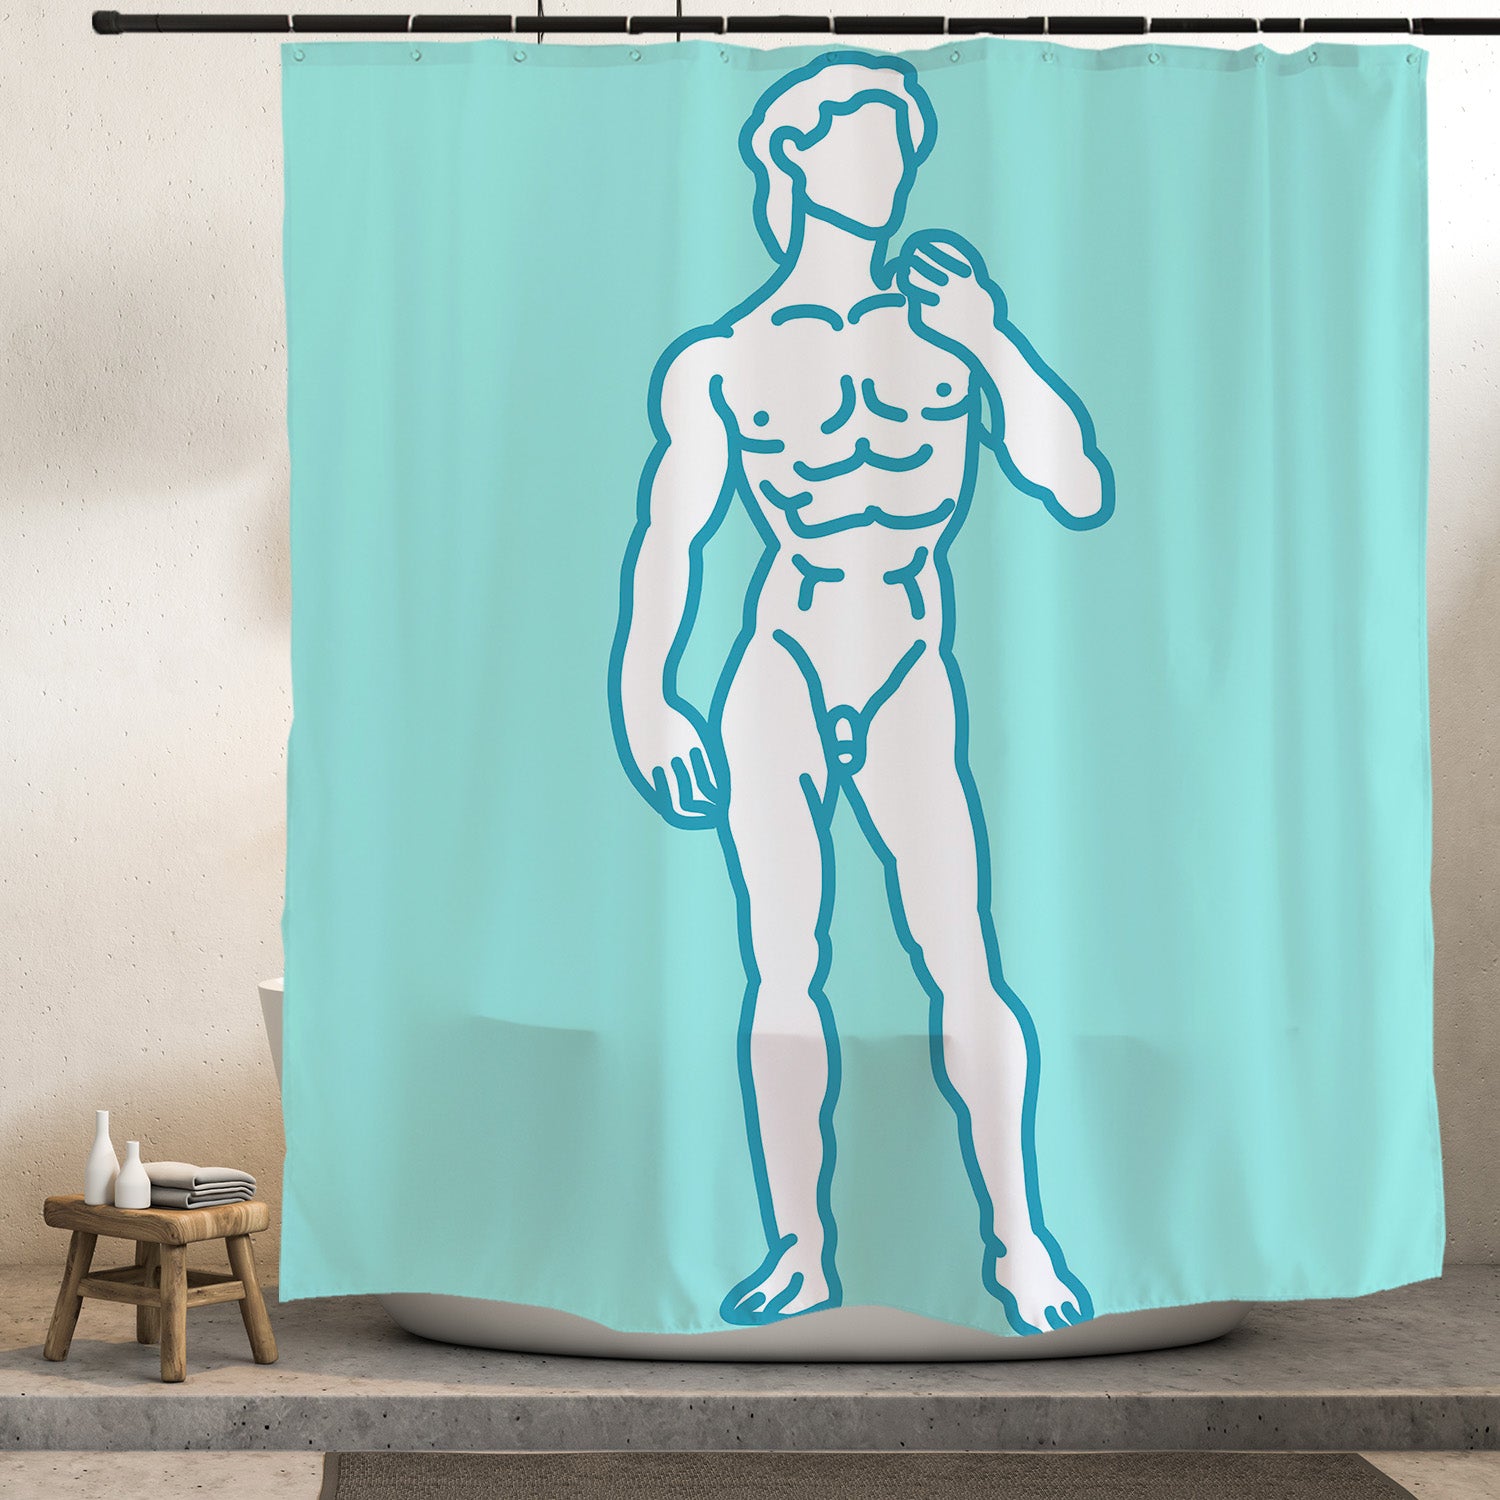 Feblilac David Shower Curtain with Hooks